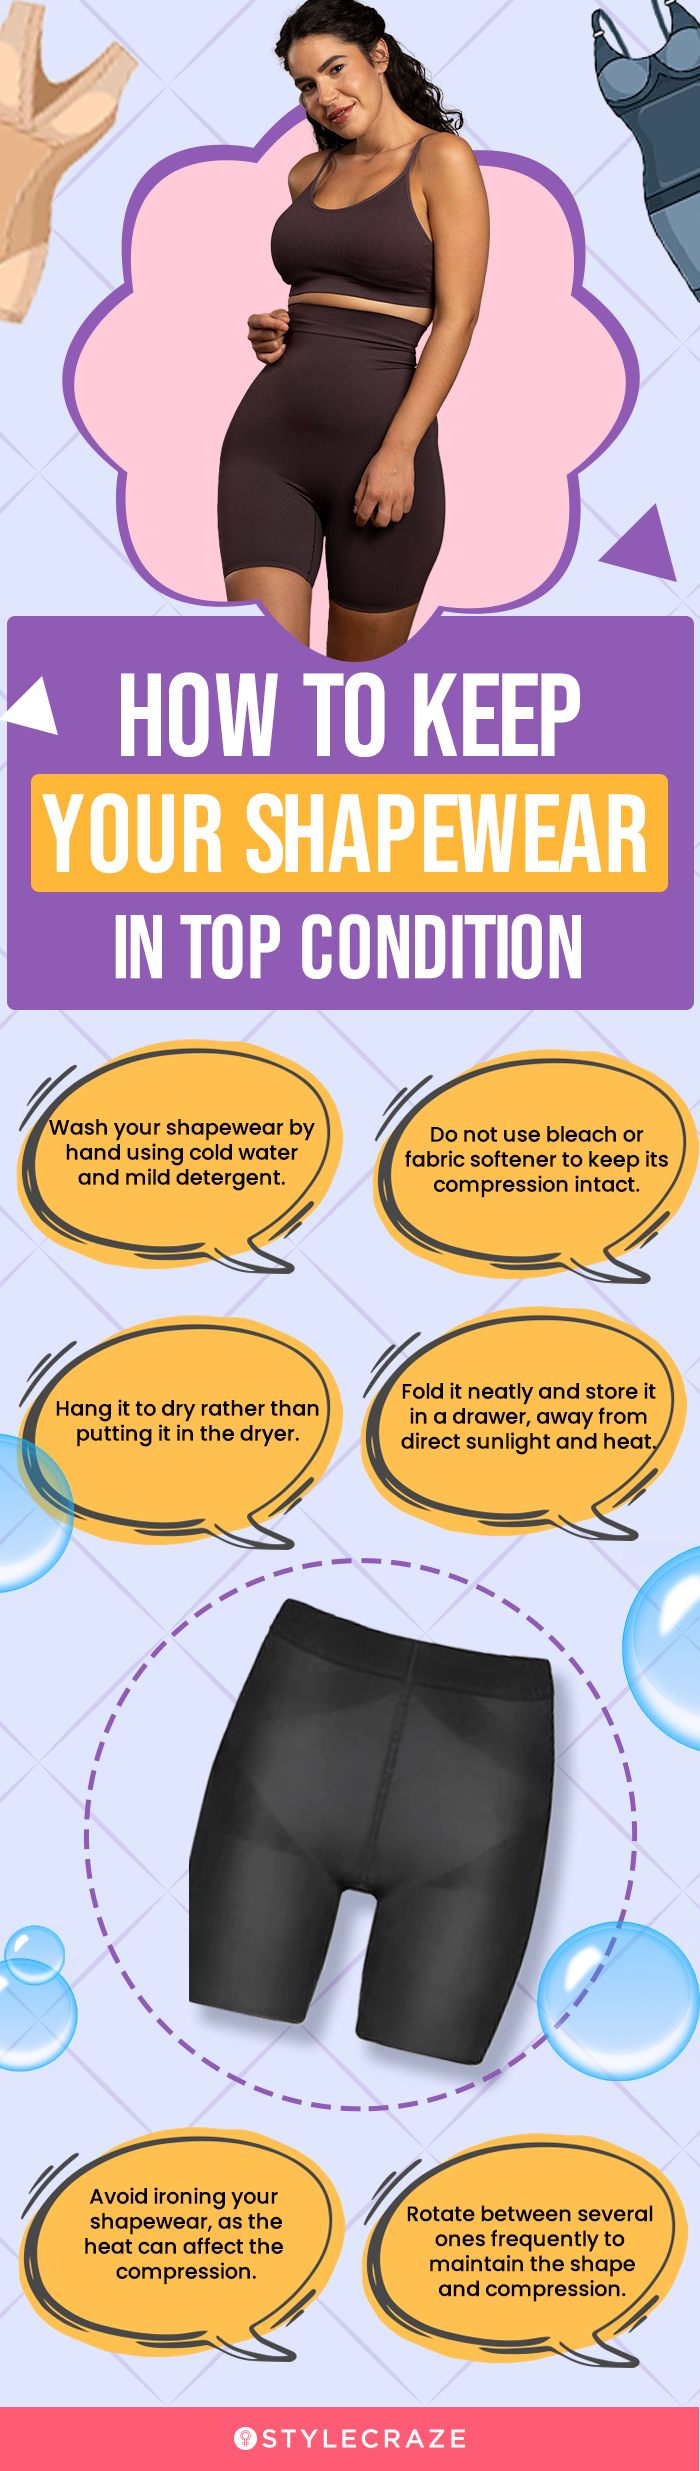 How to Keep Your Shapewear in Top Condition (infographic)